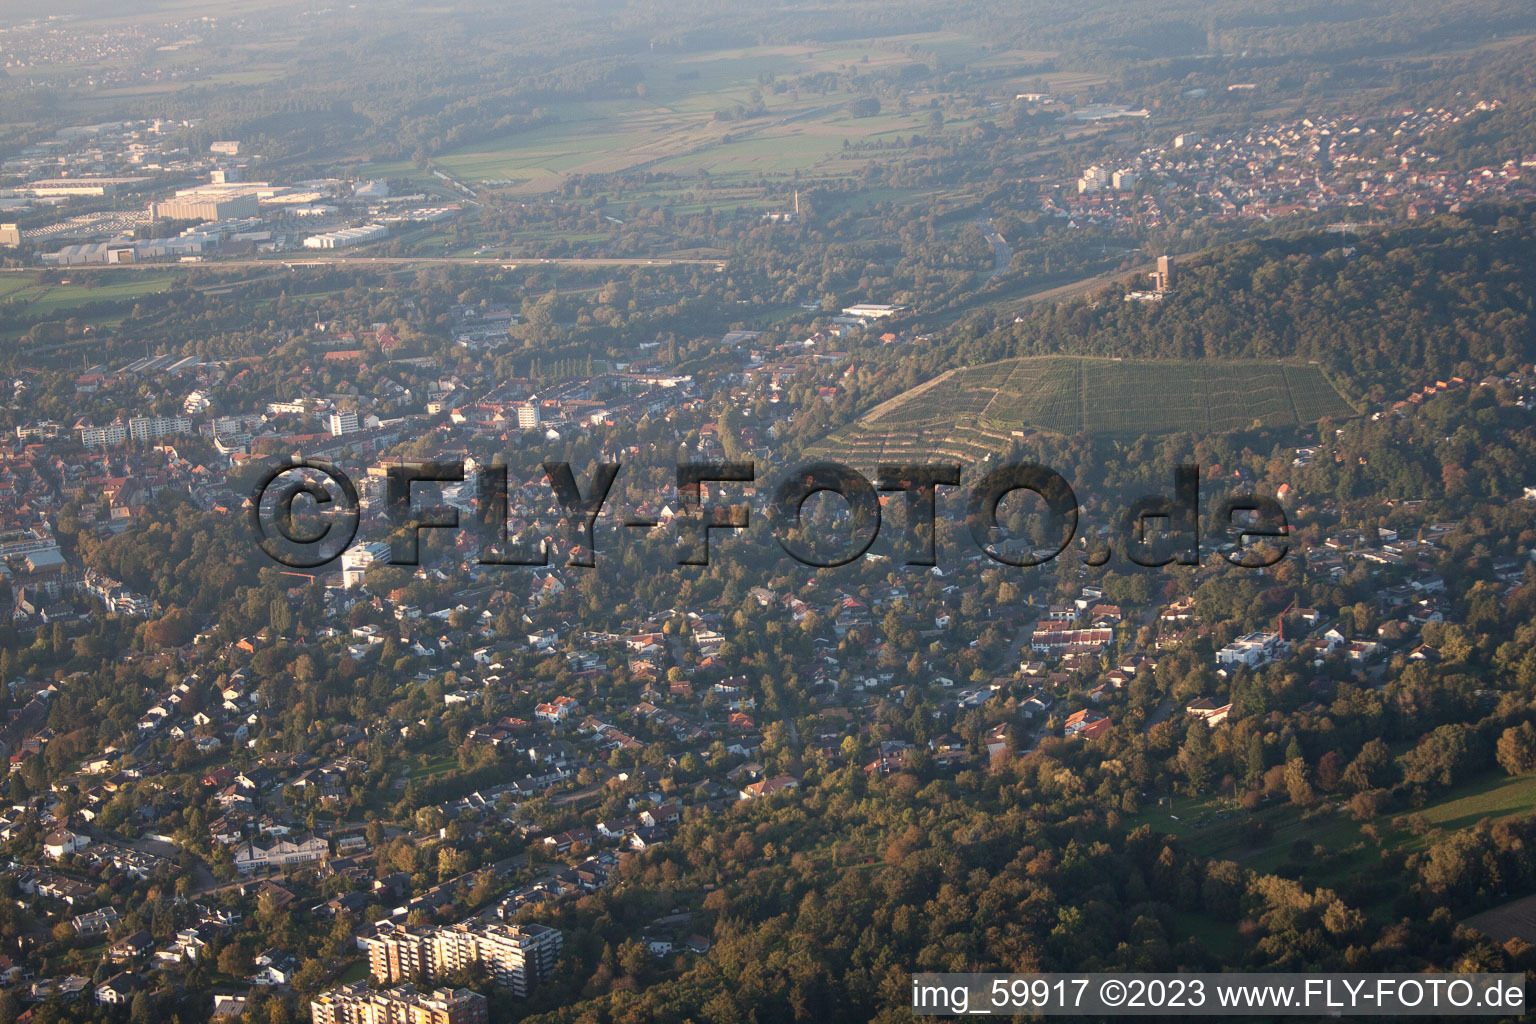 Tower Mountain in the district Durlach in Karlsruhe in the state Baden-Wuerttemberg, Germany seen from above